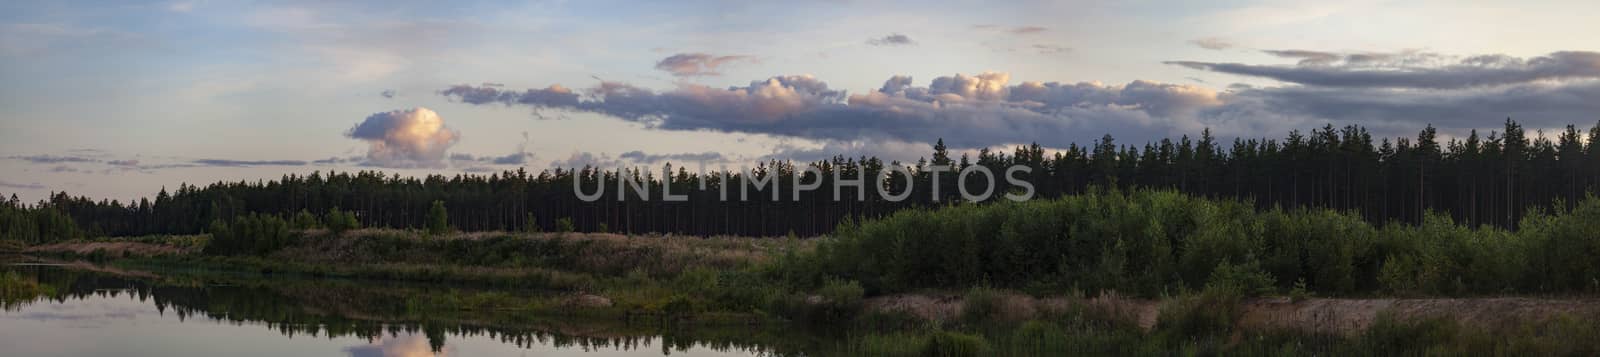 Lake and pine forest at the sunset by Angorius